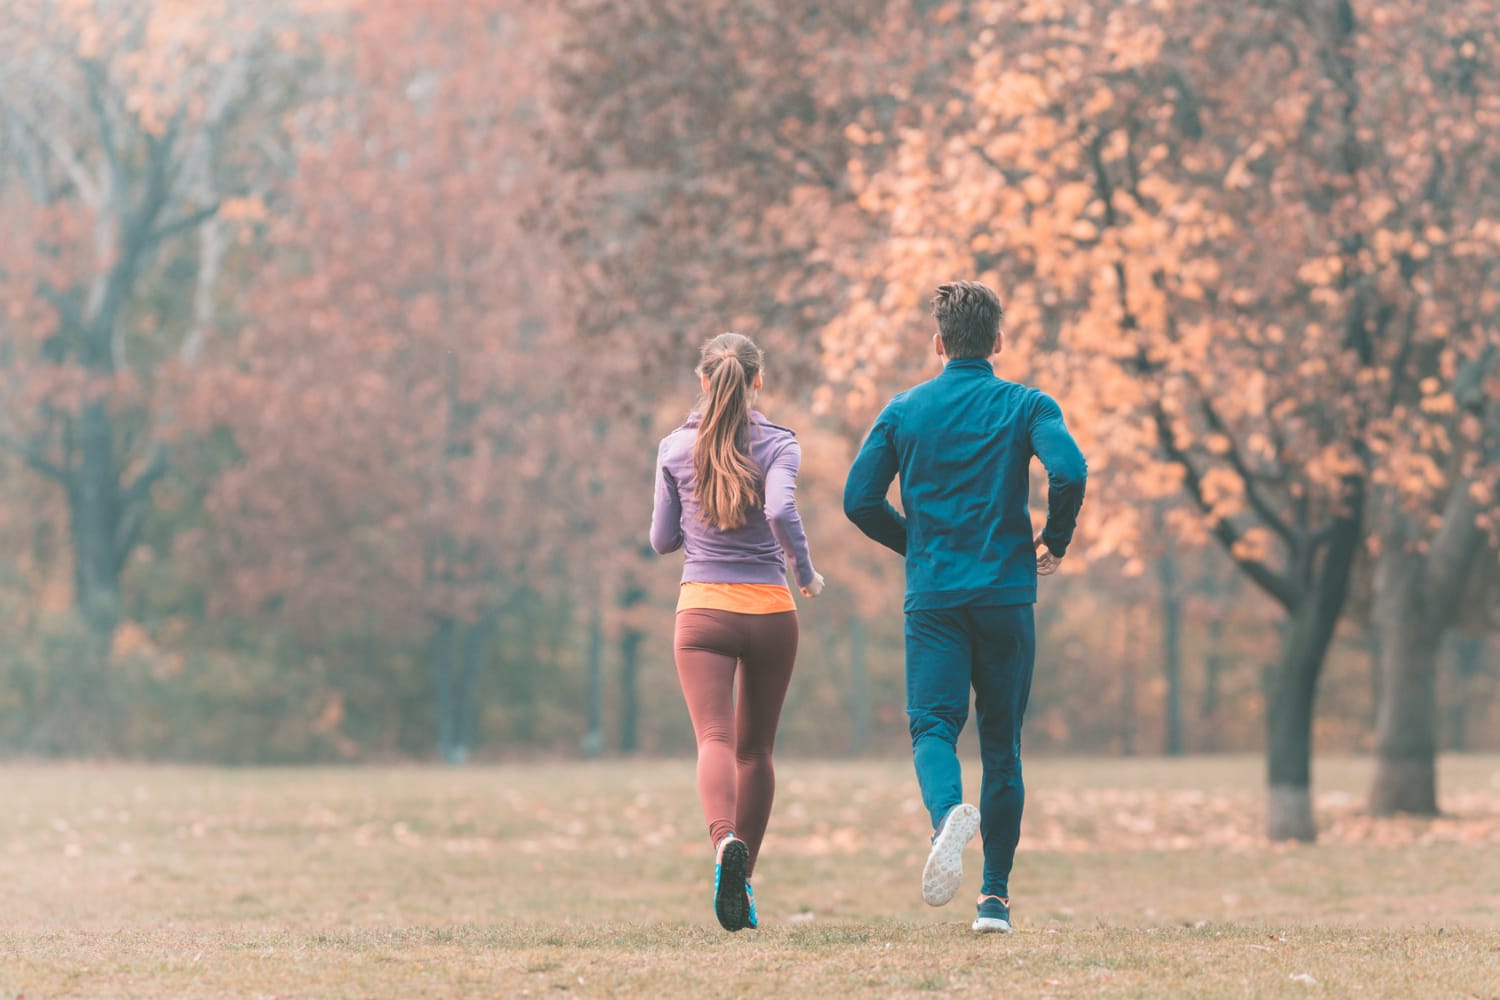 How to Find The Right Running Partner To Get The Most Out Of Your Runs